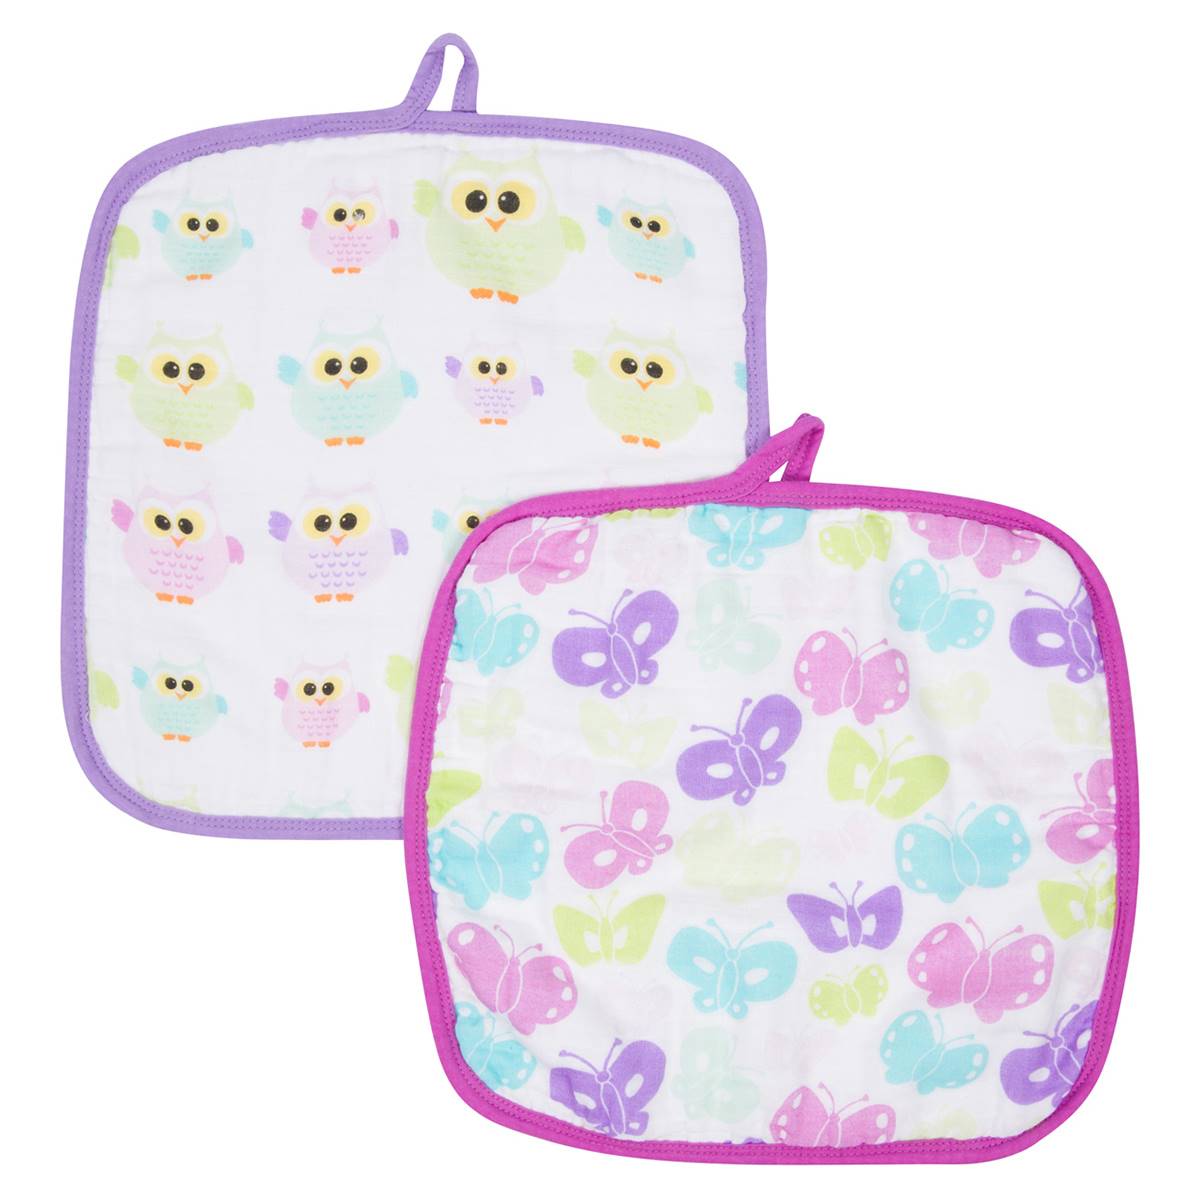 MiracleWare(R) 2-Pack Butterfly & Owl Washcloths